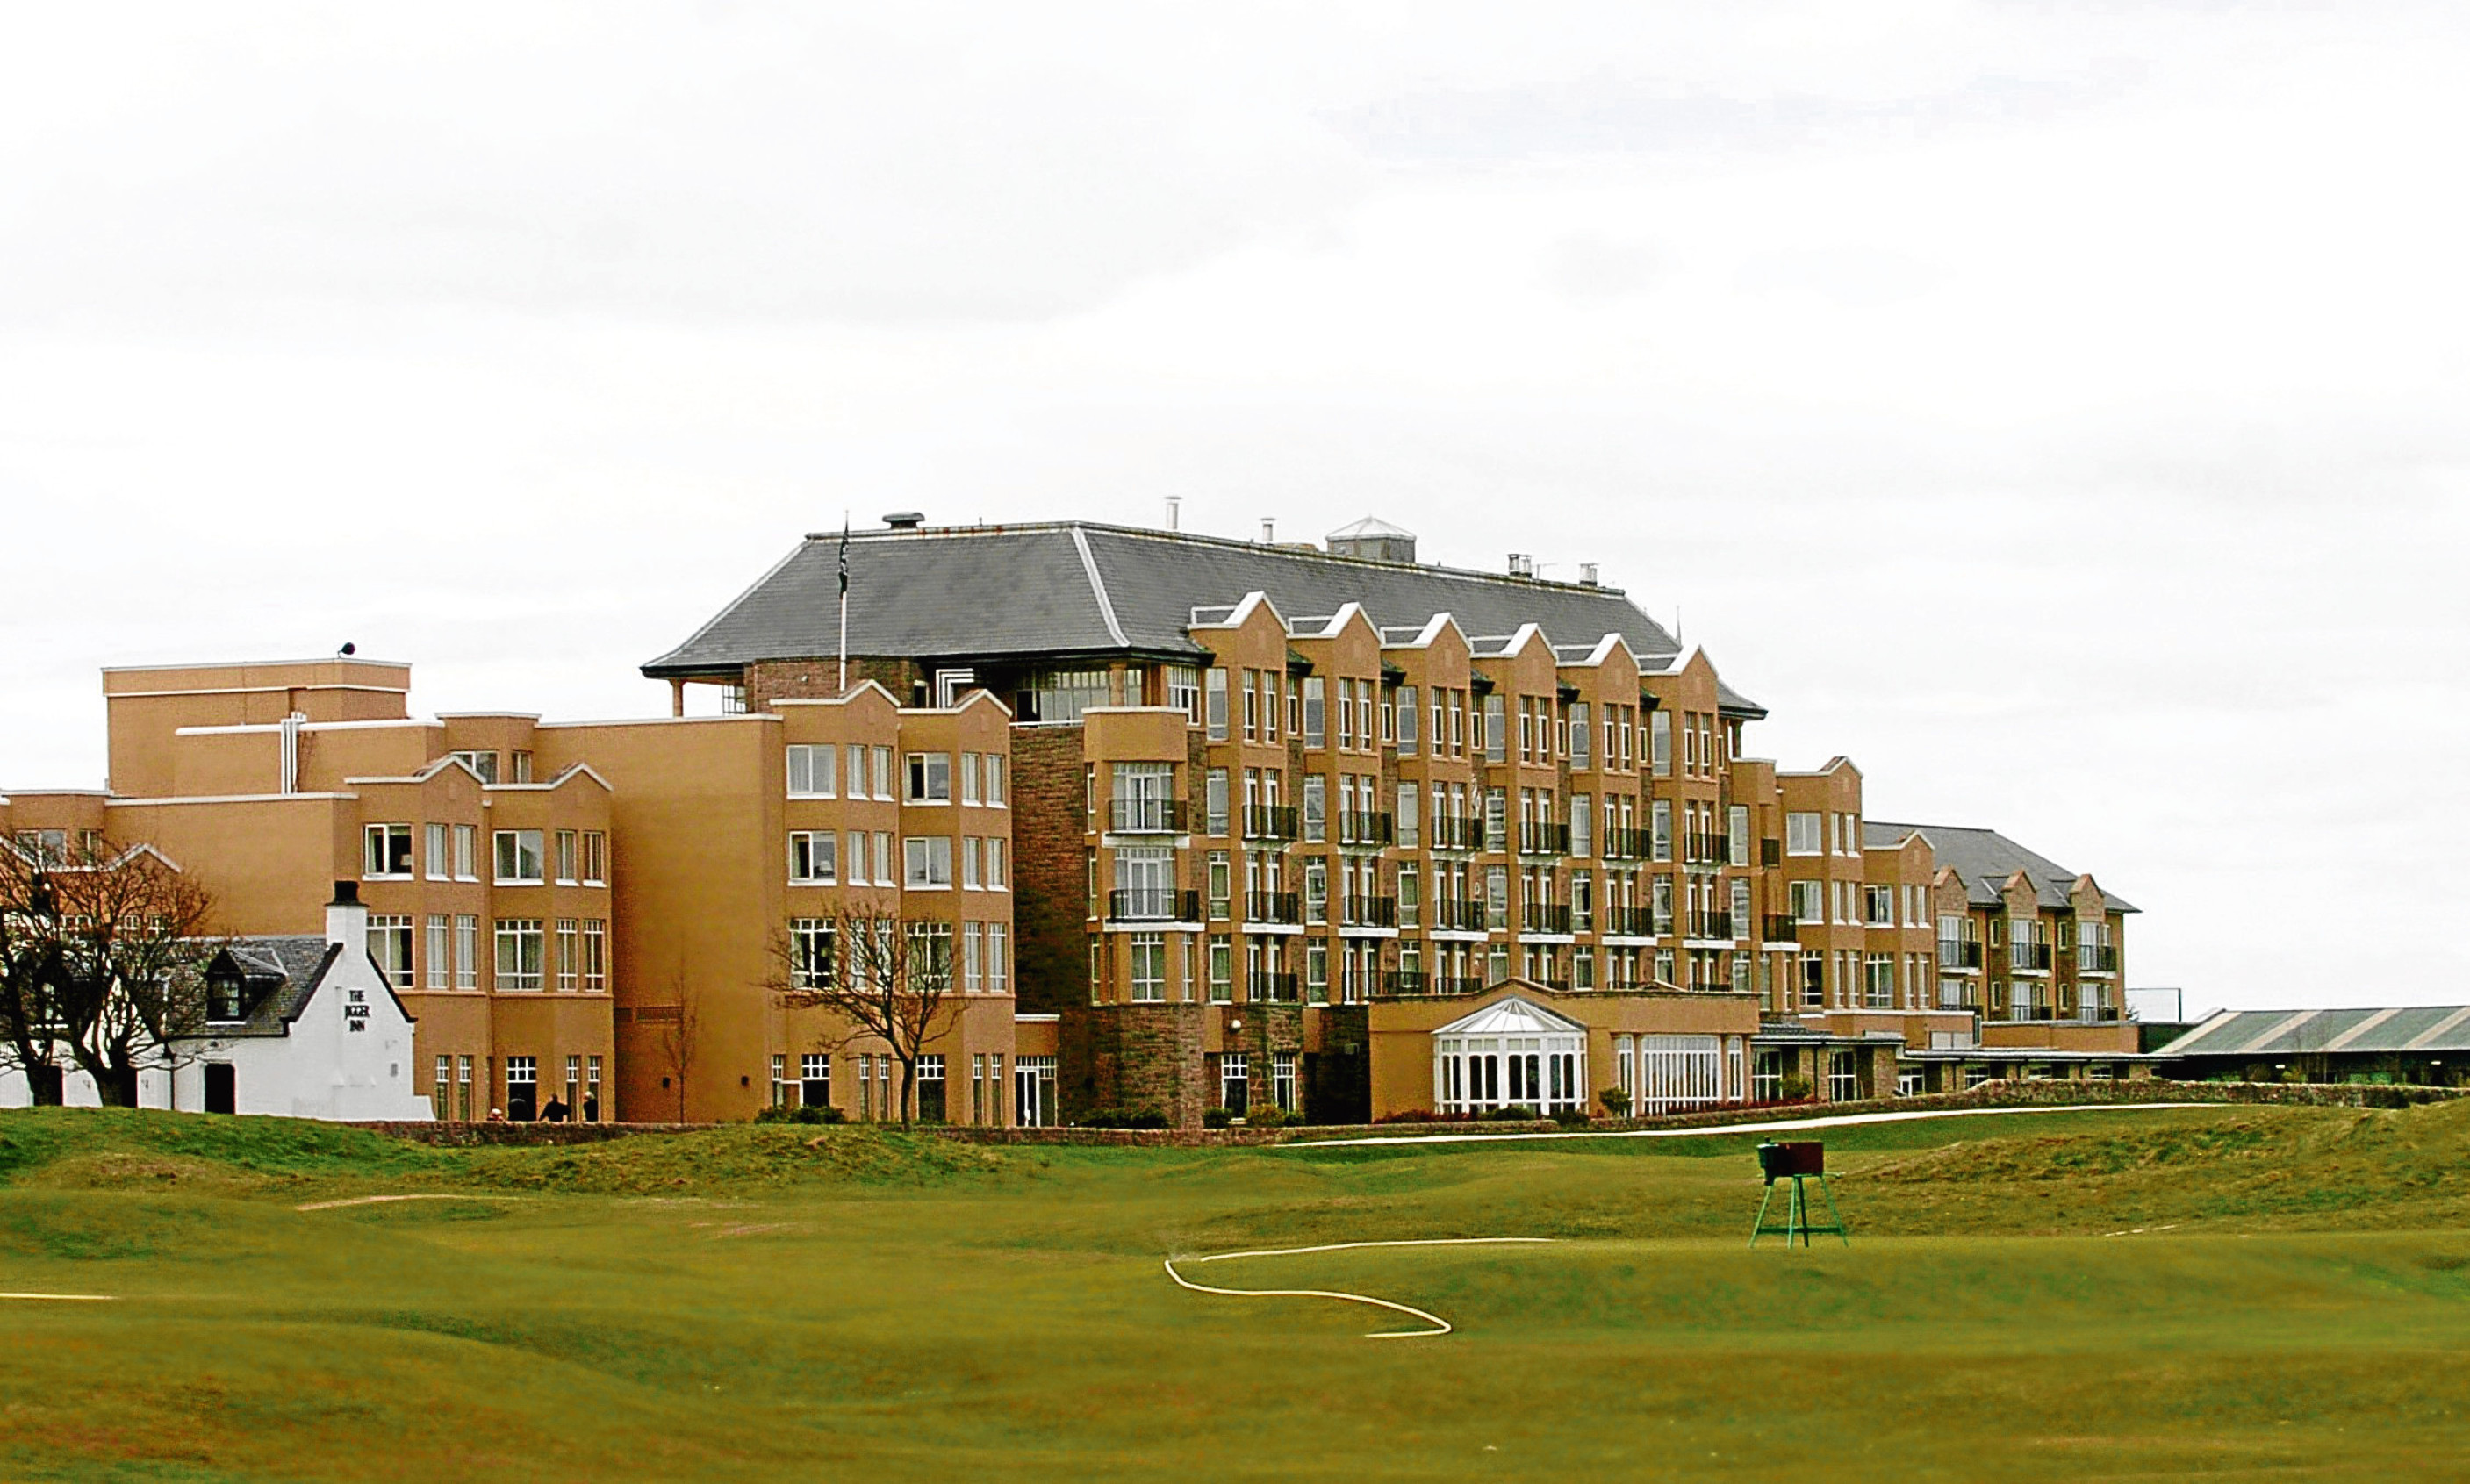 The Old Course hotel in St Andrews